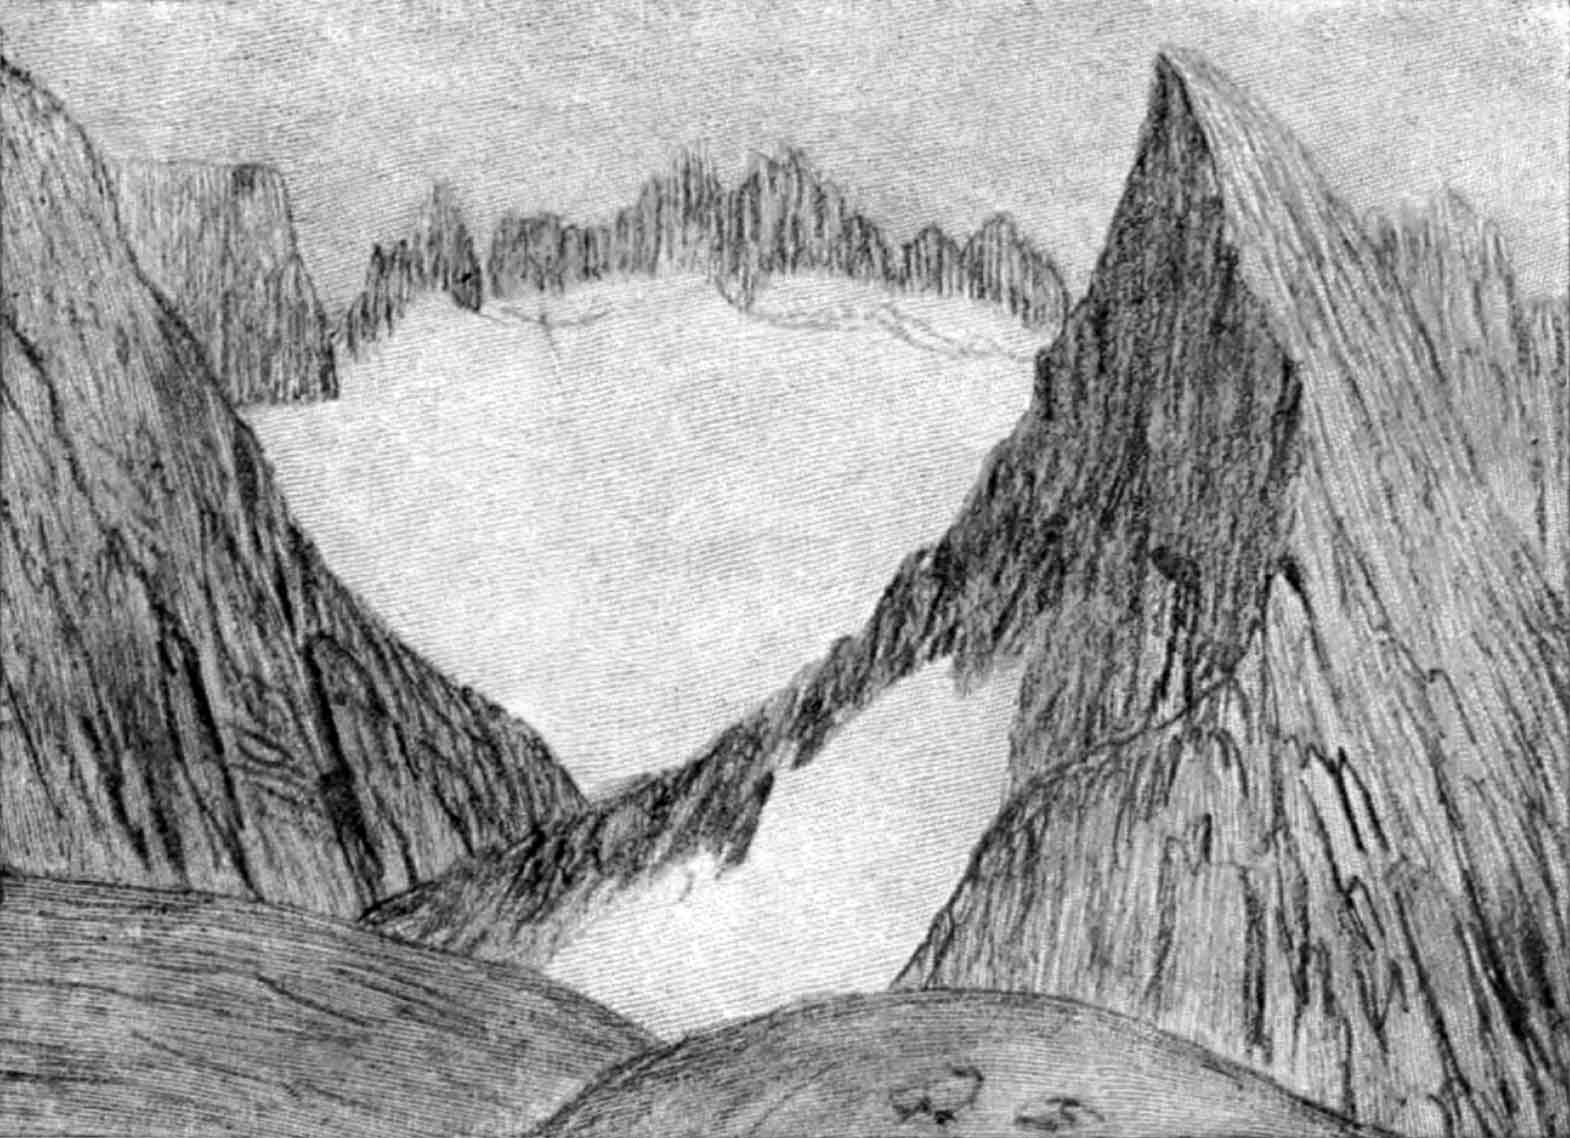 A sketch of numerous mountain peaks with dark jagged ridgelines that surround several large ice fields.